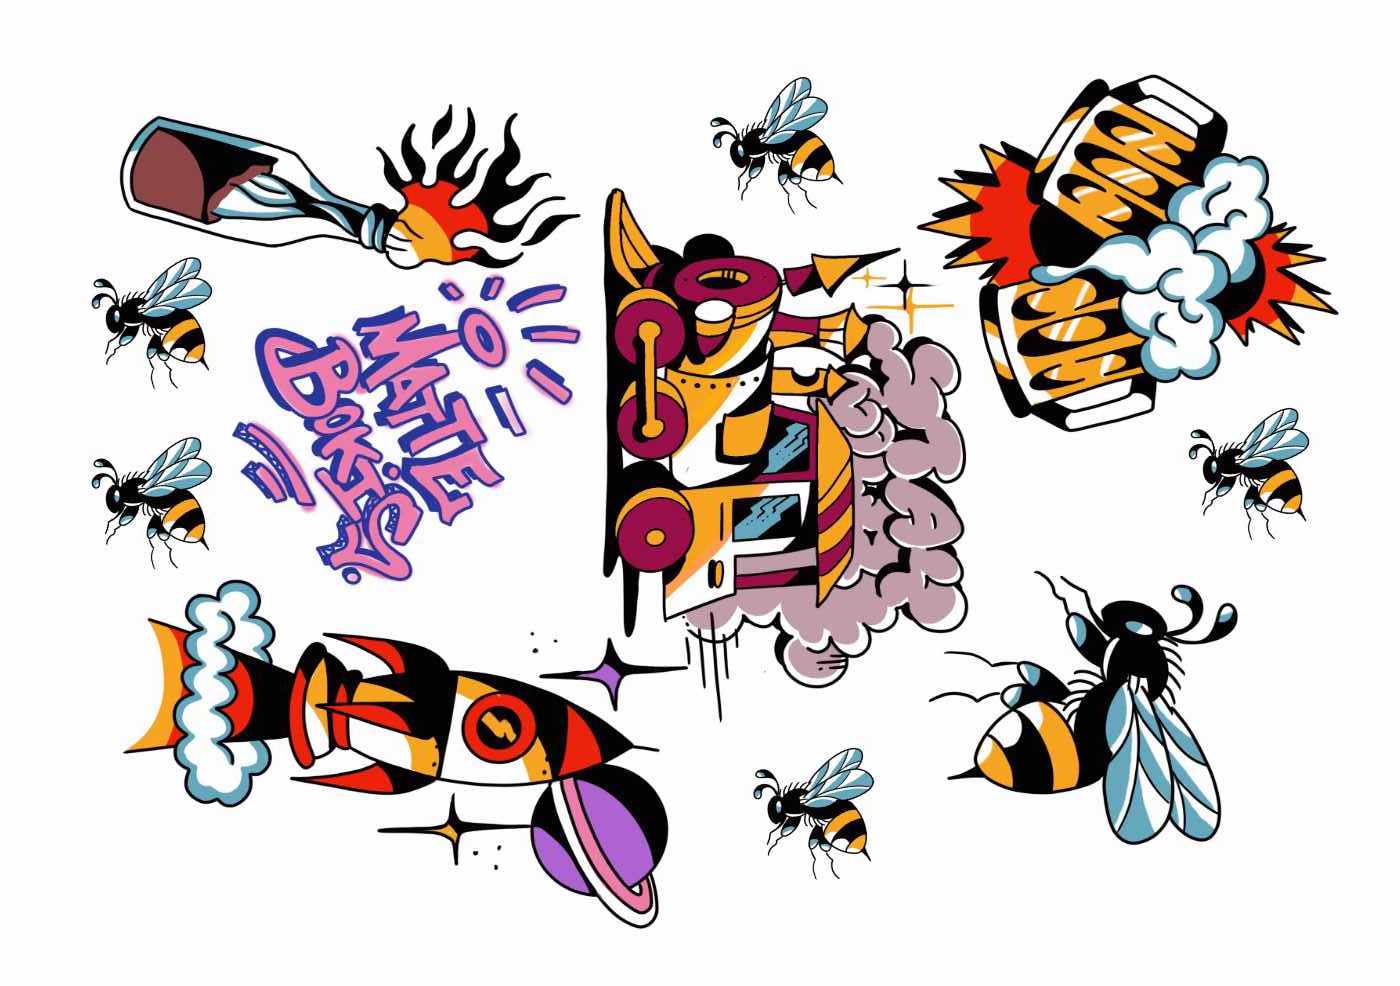 Rocket, wasp, and beer glass in graffiti style as temporary tattoos from Like ink.